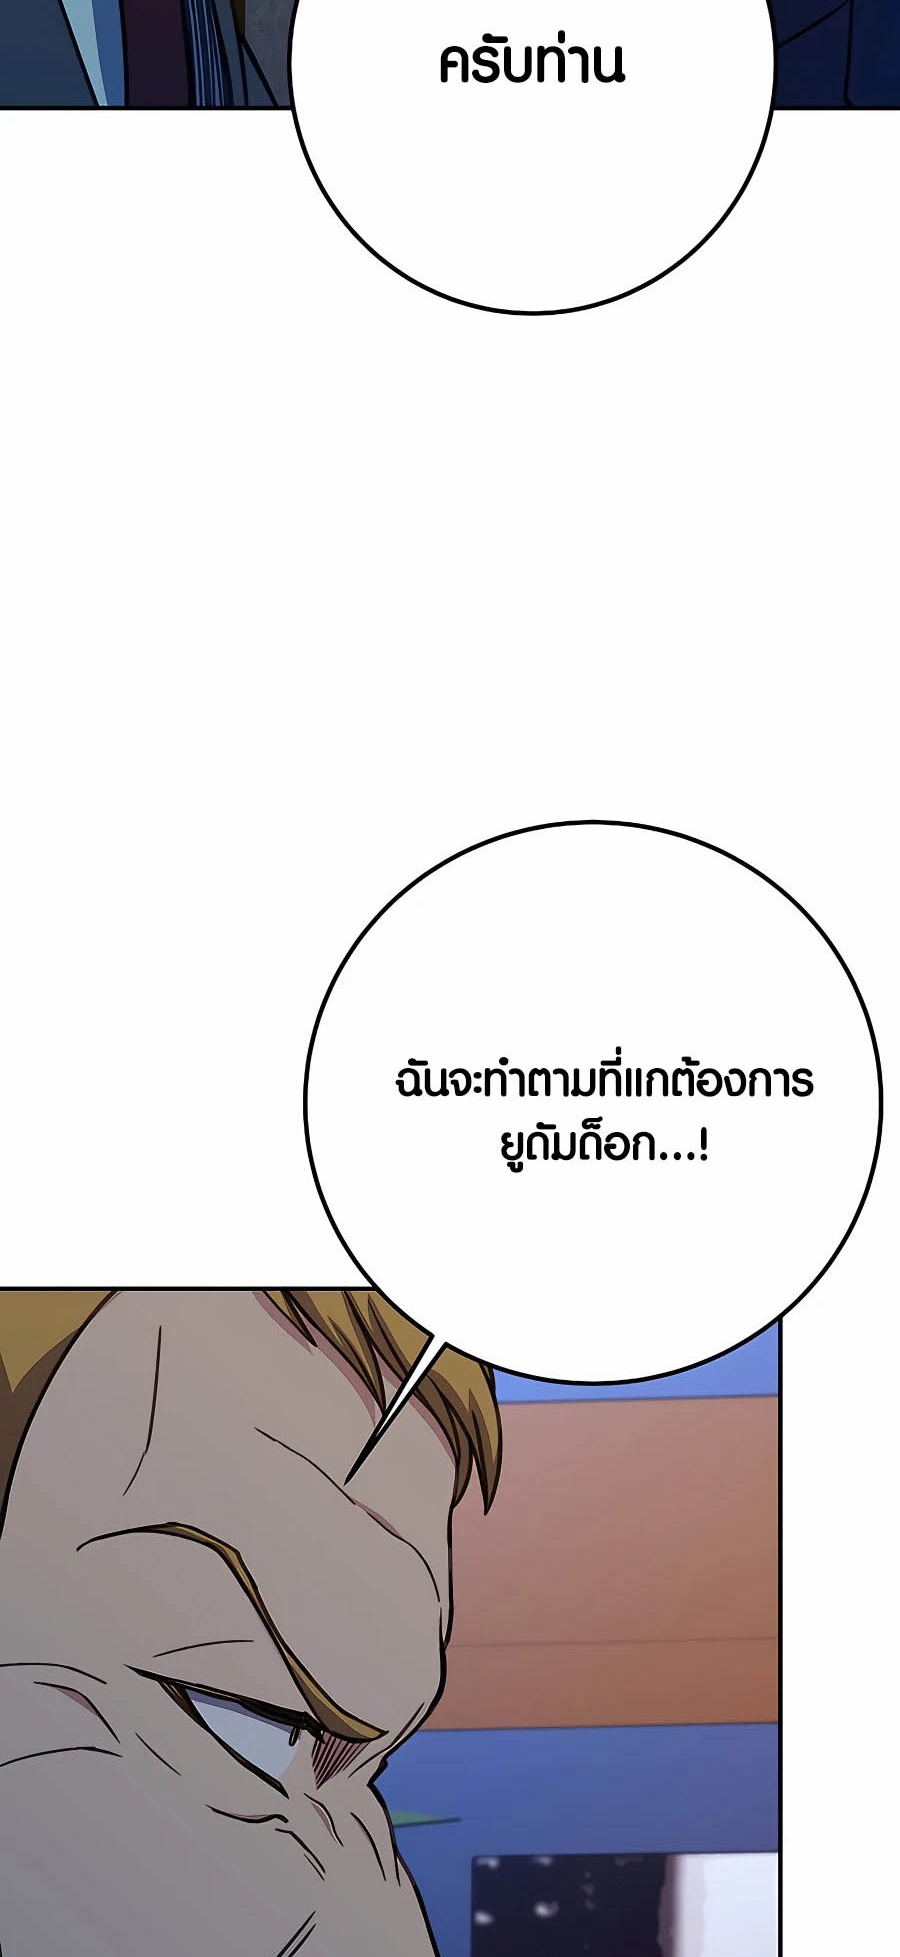 à¸­à¹ˆà¸²à¸™à¸¡à¸±à¸™à¸®à¸§à¸² à¹€à¸£à¸·à¹ˆà¸­à¸‡ The Part Time Land of the Gods 56 61